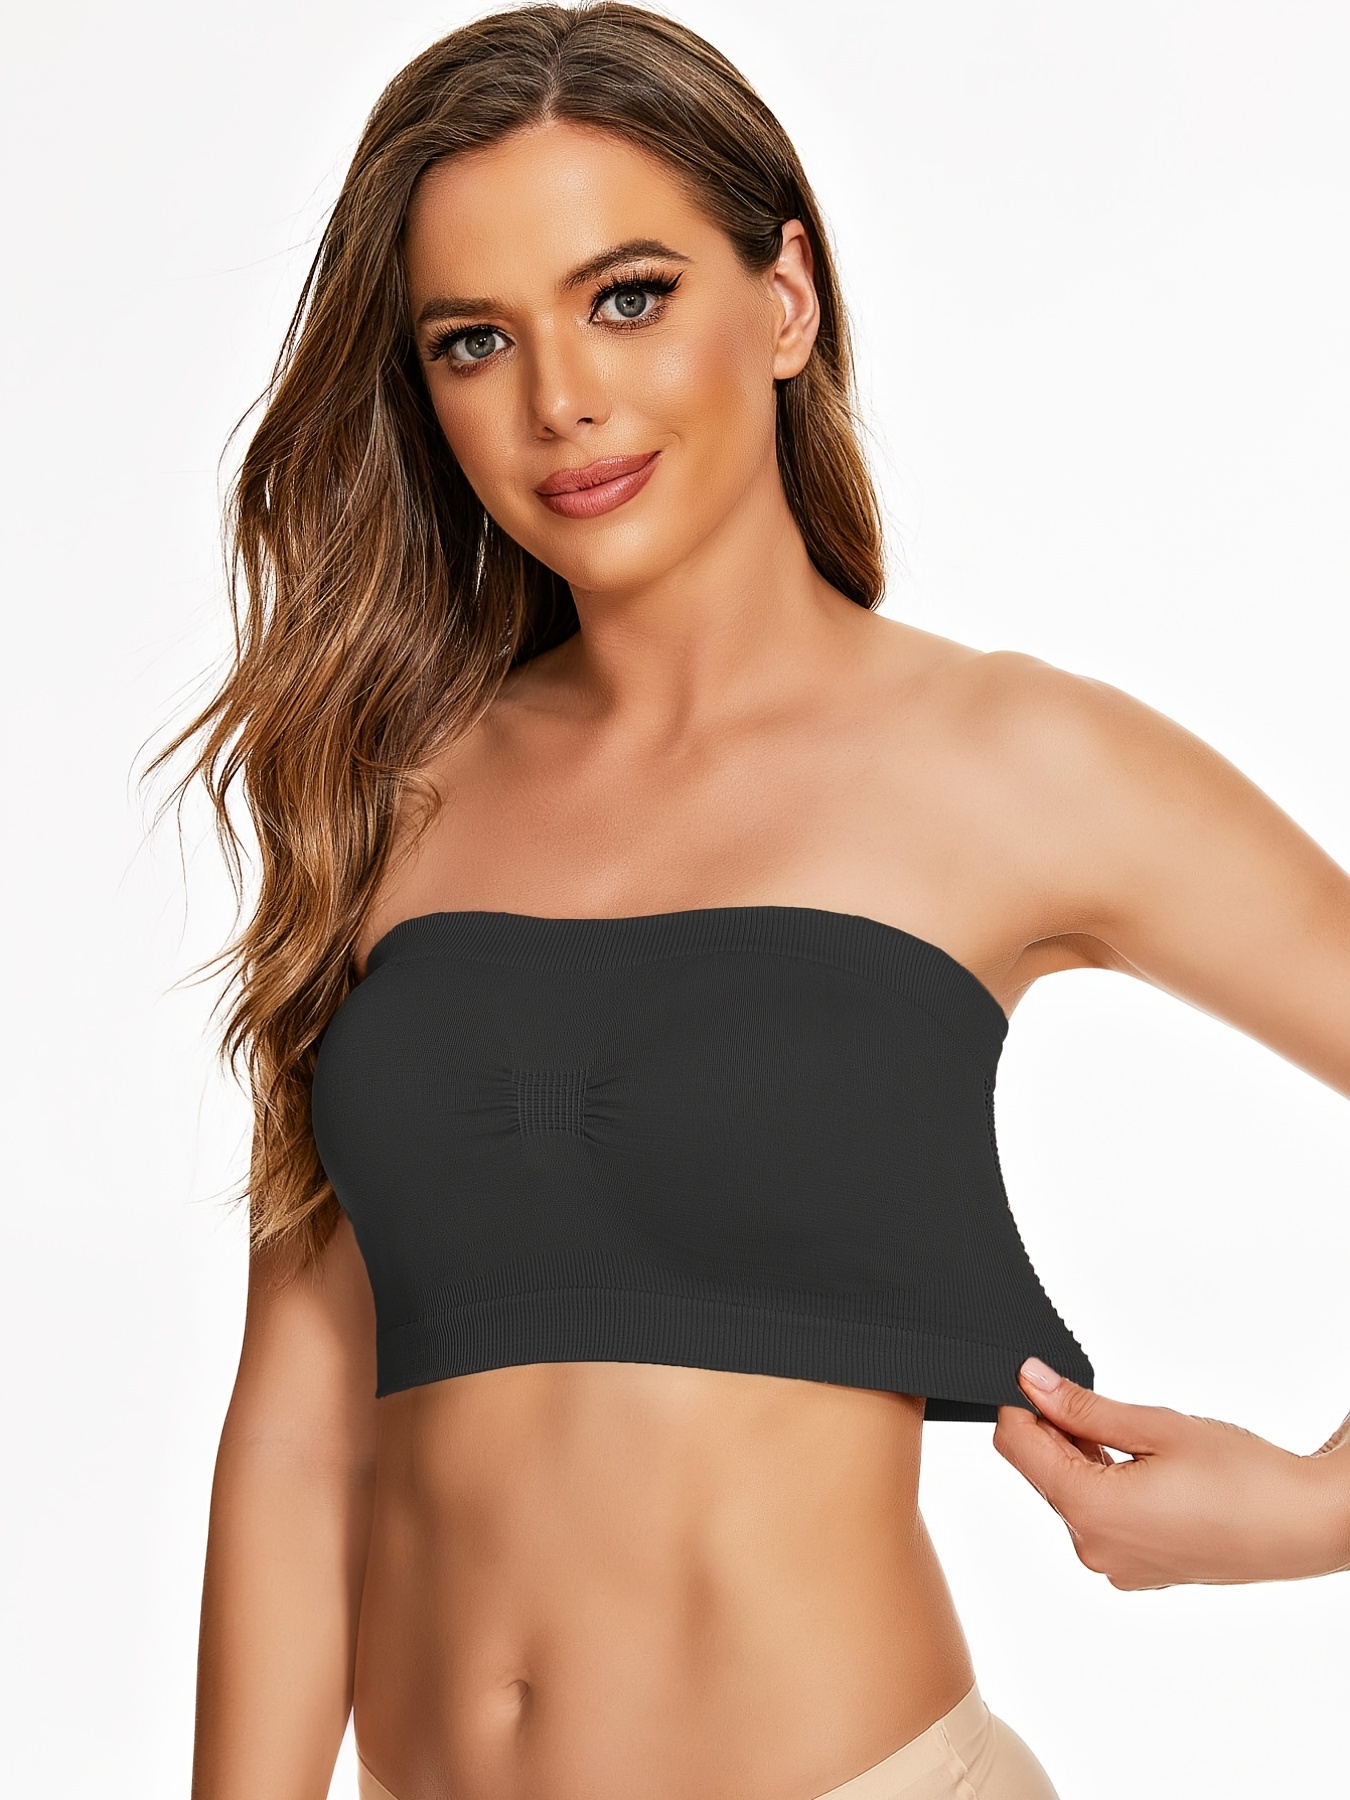 Out From Under Seamless Bandeau Bra Top  Bandeau bra, Hipster fashion, Bra  tops